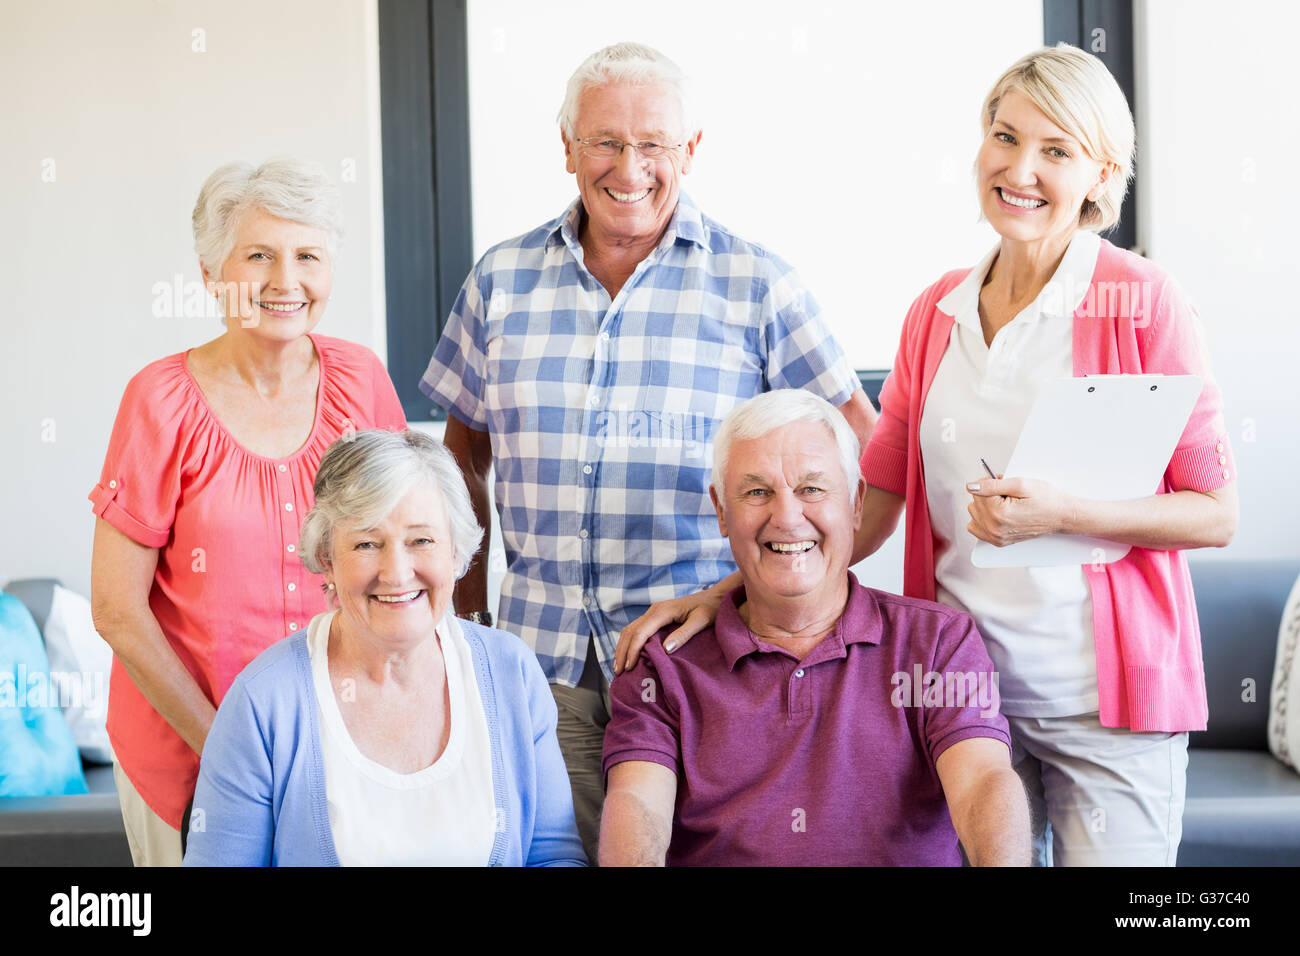 Nurse and seniors standing together Stock Photo